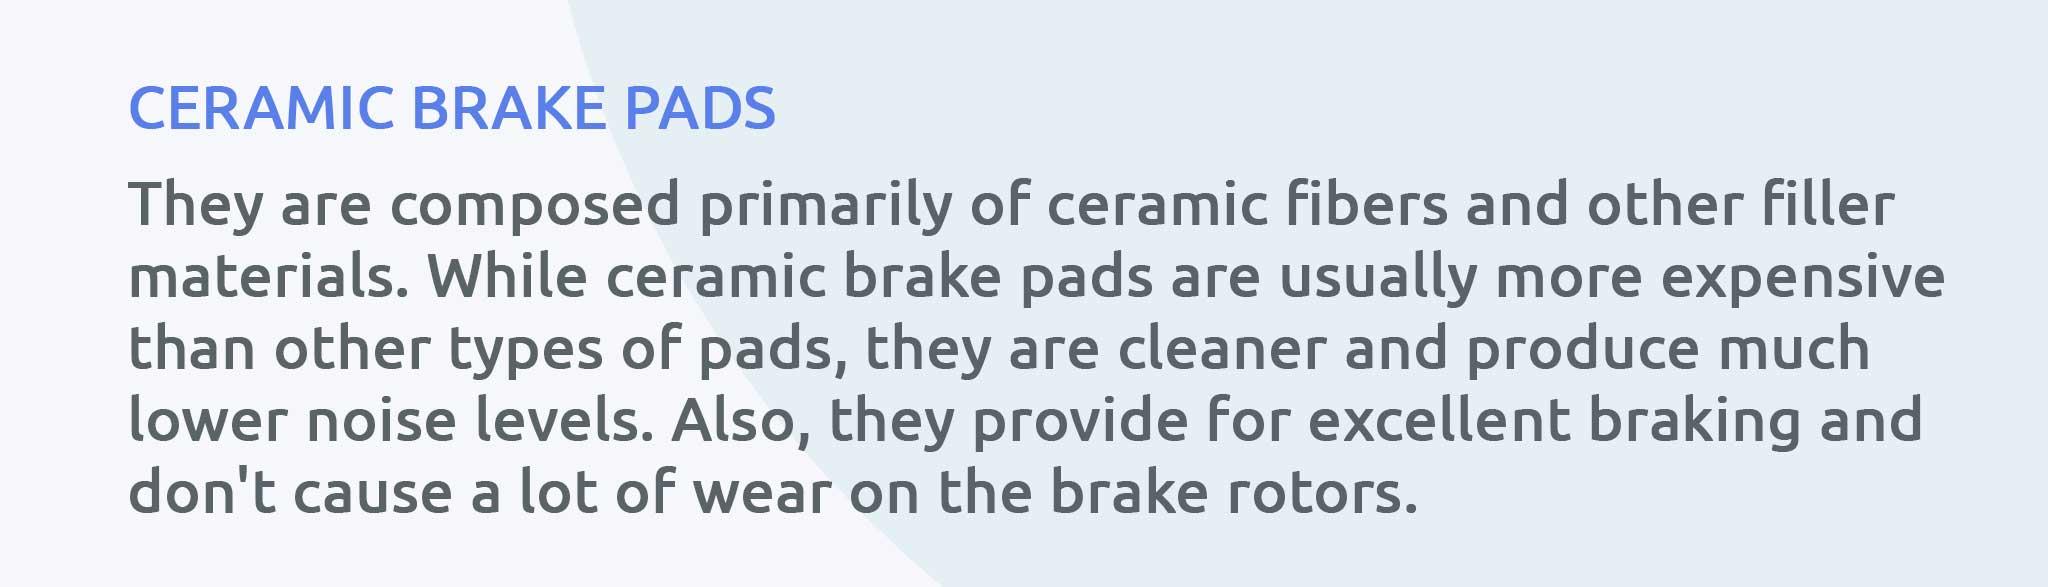 They are composed primarily of ceramic fibers and other filler materials. While ceramic brake pads are usually more expensive than other types of pads, they are cleaner and produce much lower noise levels. Also, they provide for excellent braking and don't cause a lot of wear on the brake rotors.